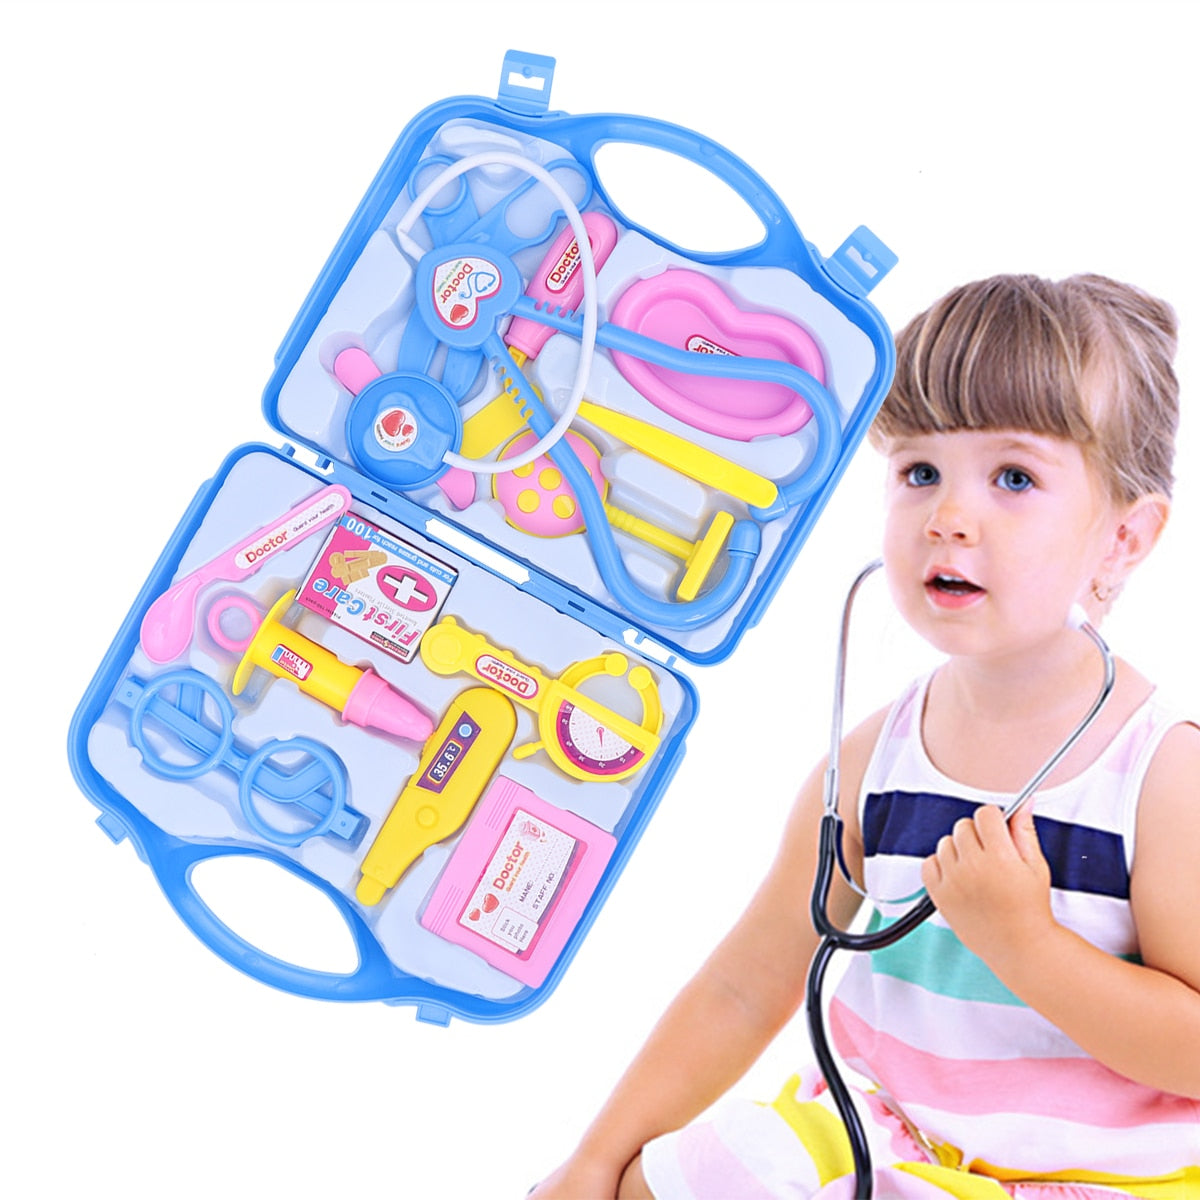 Buy Children's Little Doctor Toy Tool Kits Pretend Play Toy Role Play Sets Medical Stethoscope Toys with Suitcase for Kids  Girls - sams toy world shops in Ahmedabad - call on 9664998614 - best kids stores in Gujarat - Near me - discounted prices